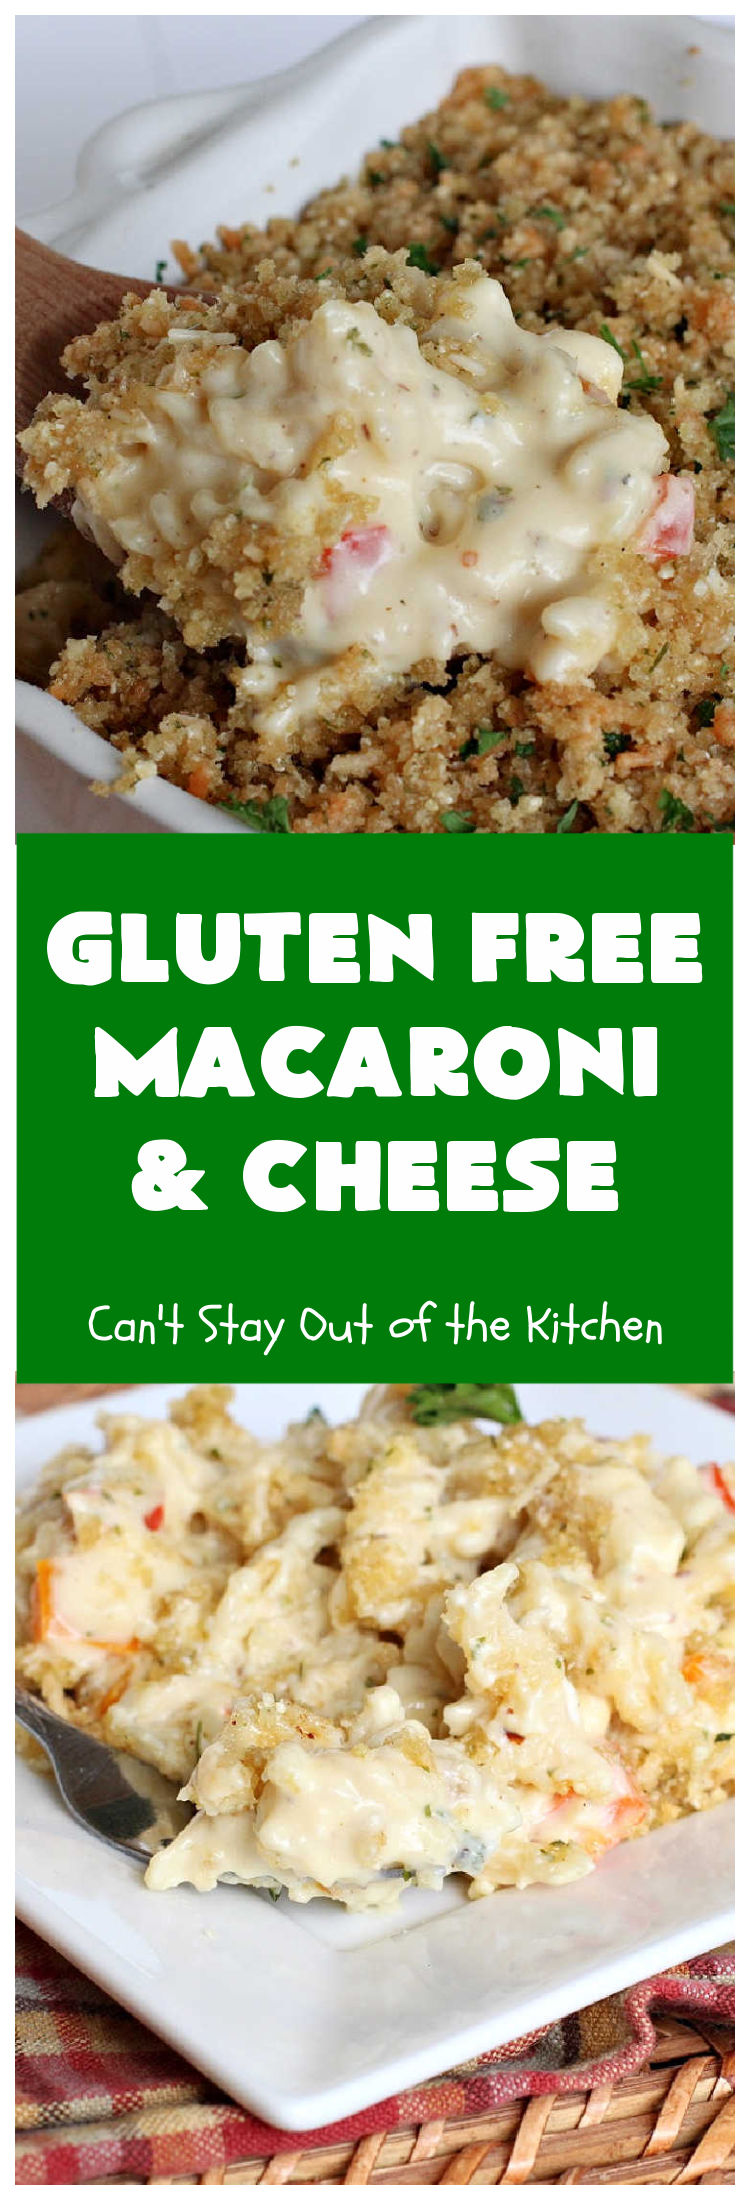 Gluten Free Macaroni & Cheese | Can't Stay Out of the Kitchen | one of the BEST #MacAndCheese dishes you'll ever eat. If you want comfort food, this extra creamy version uses 3 #cheeses! Terrific for family or company dinners. #GlutenFree #MacaroniAndCheese #FavoriteMacAndCheese #GlutenFreeMacaroniAndCheese